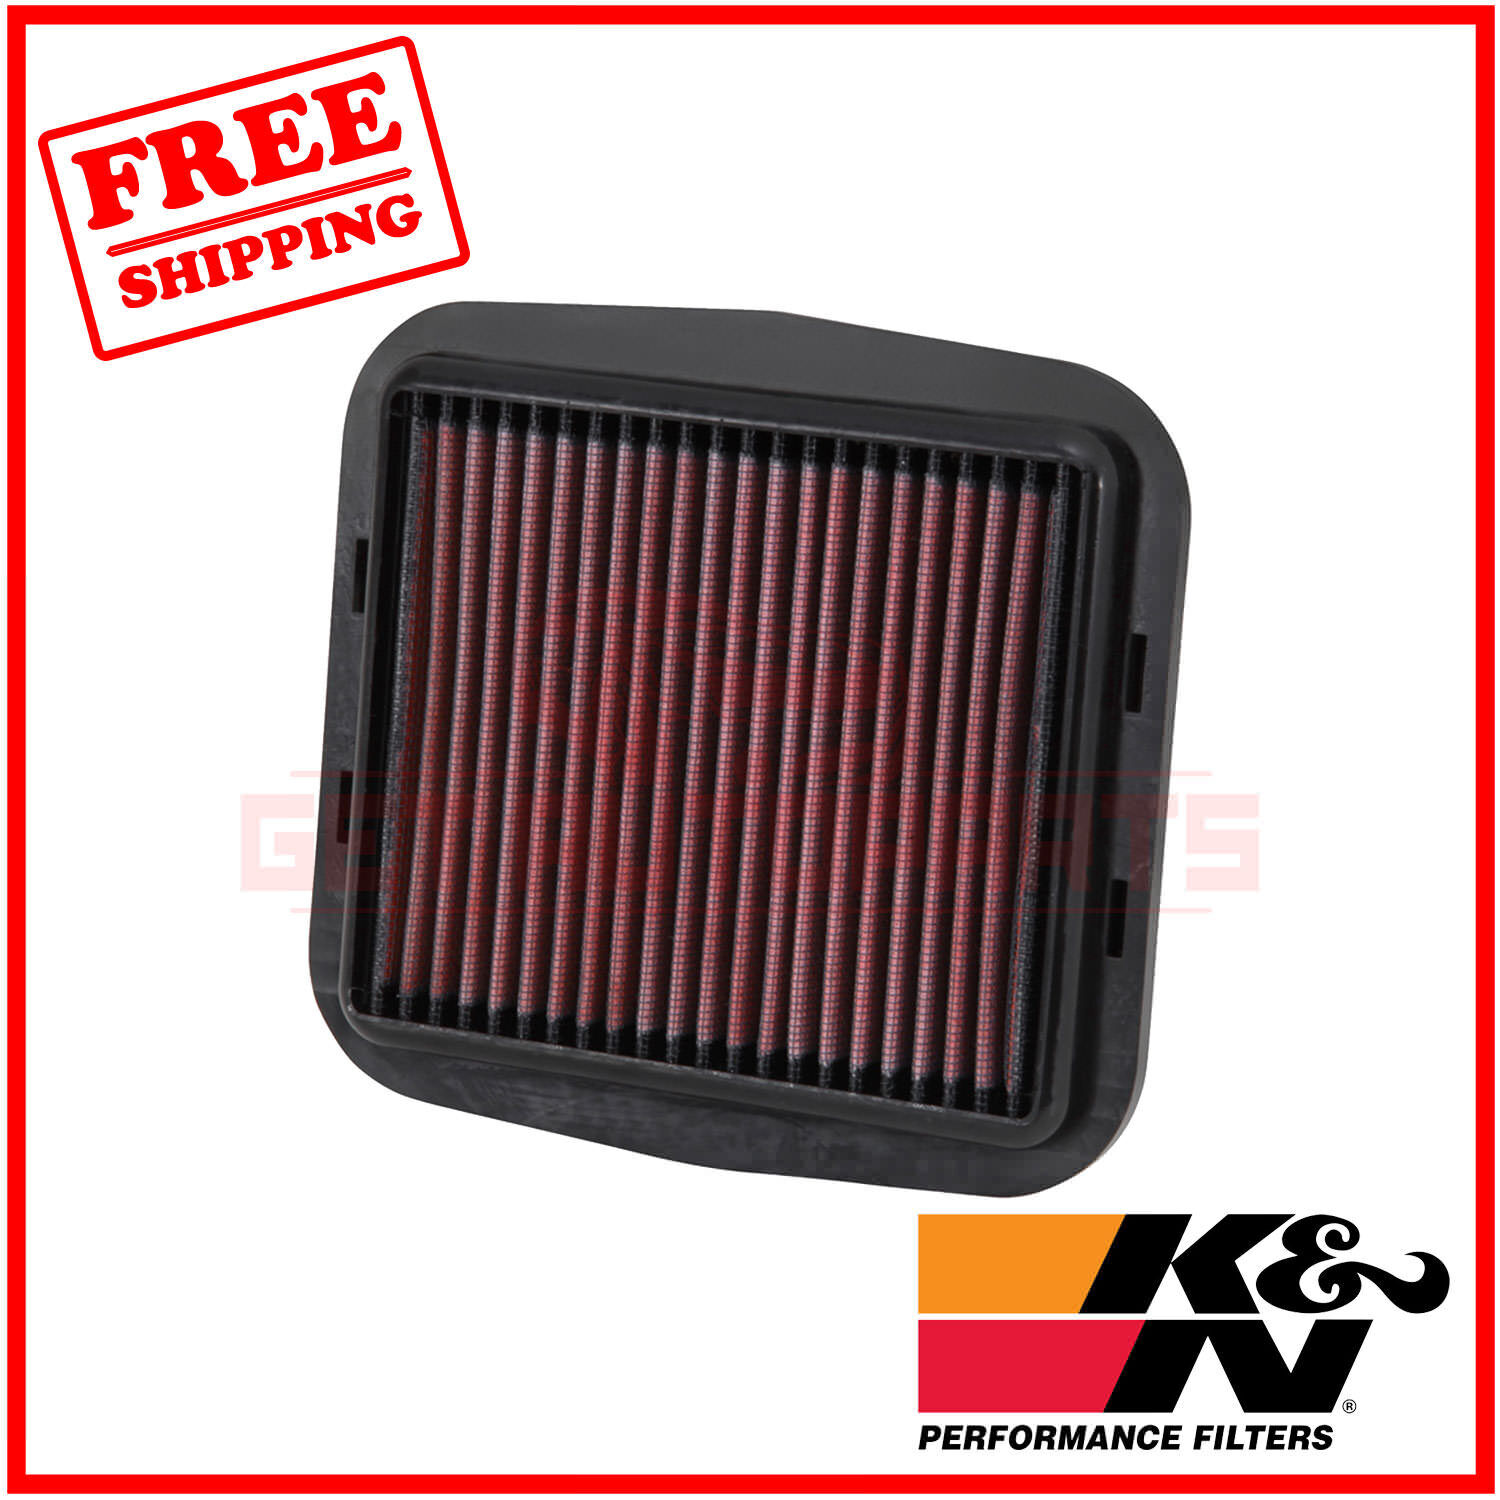 K&N Replacement Air Filter fits Ducati XDiavel 2016-2018